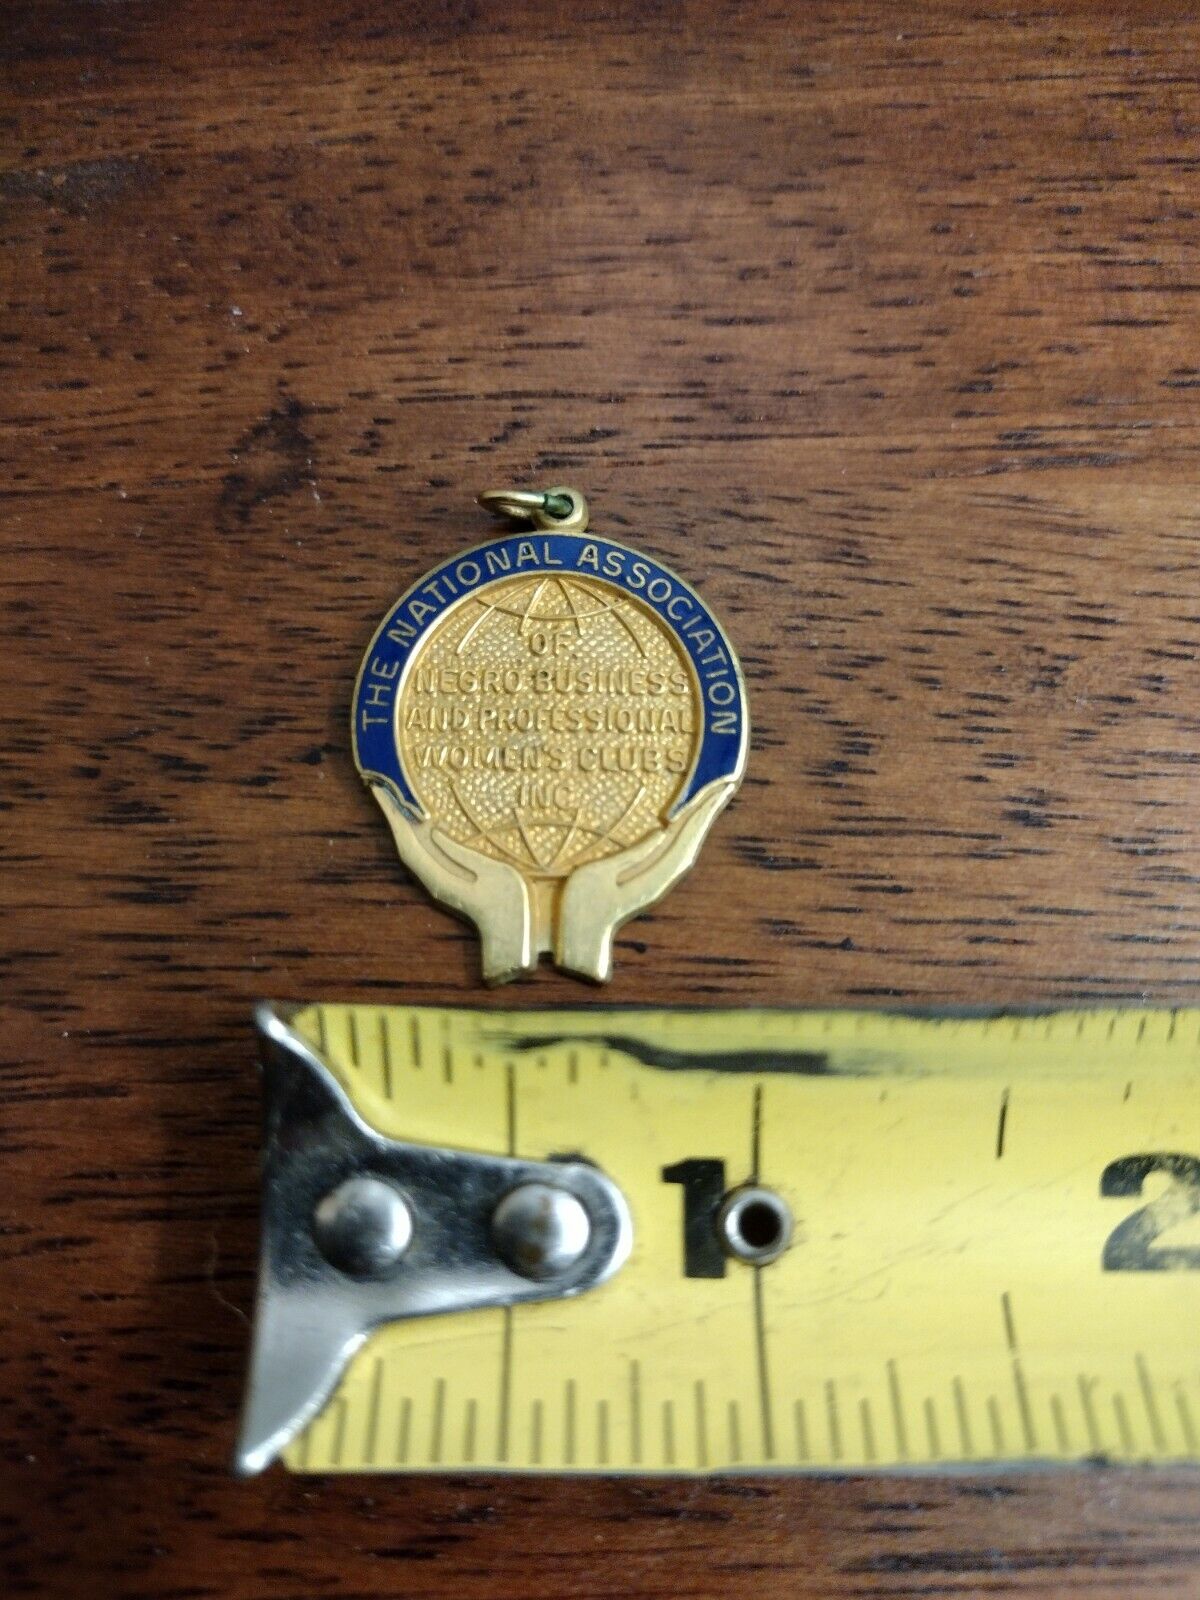 Rare * National Association Of Colored Business Professional Women Club* Medal